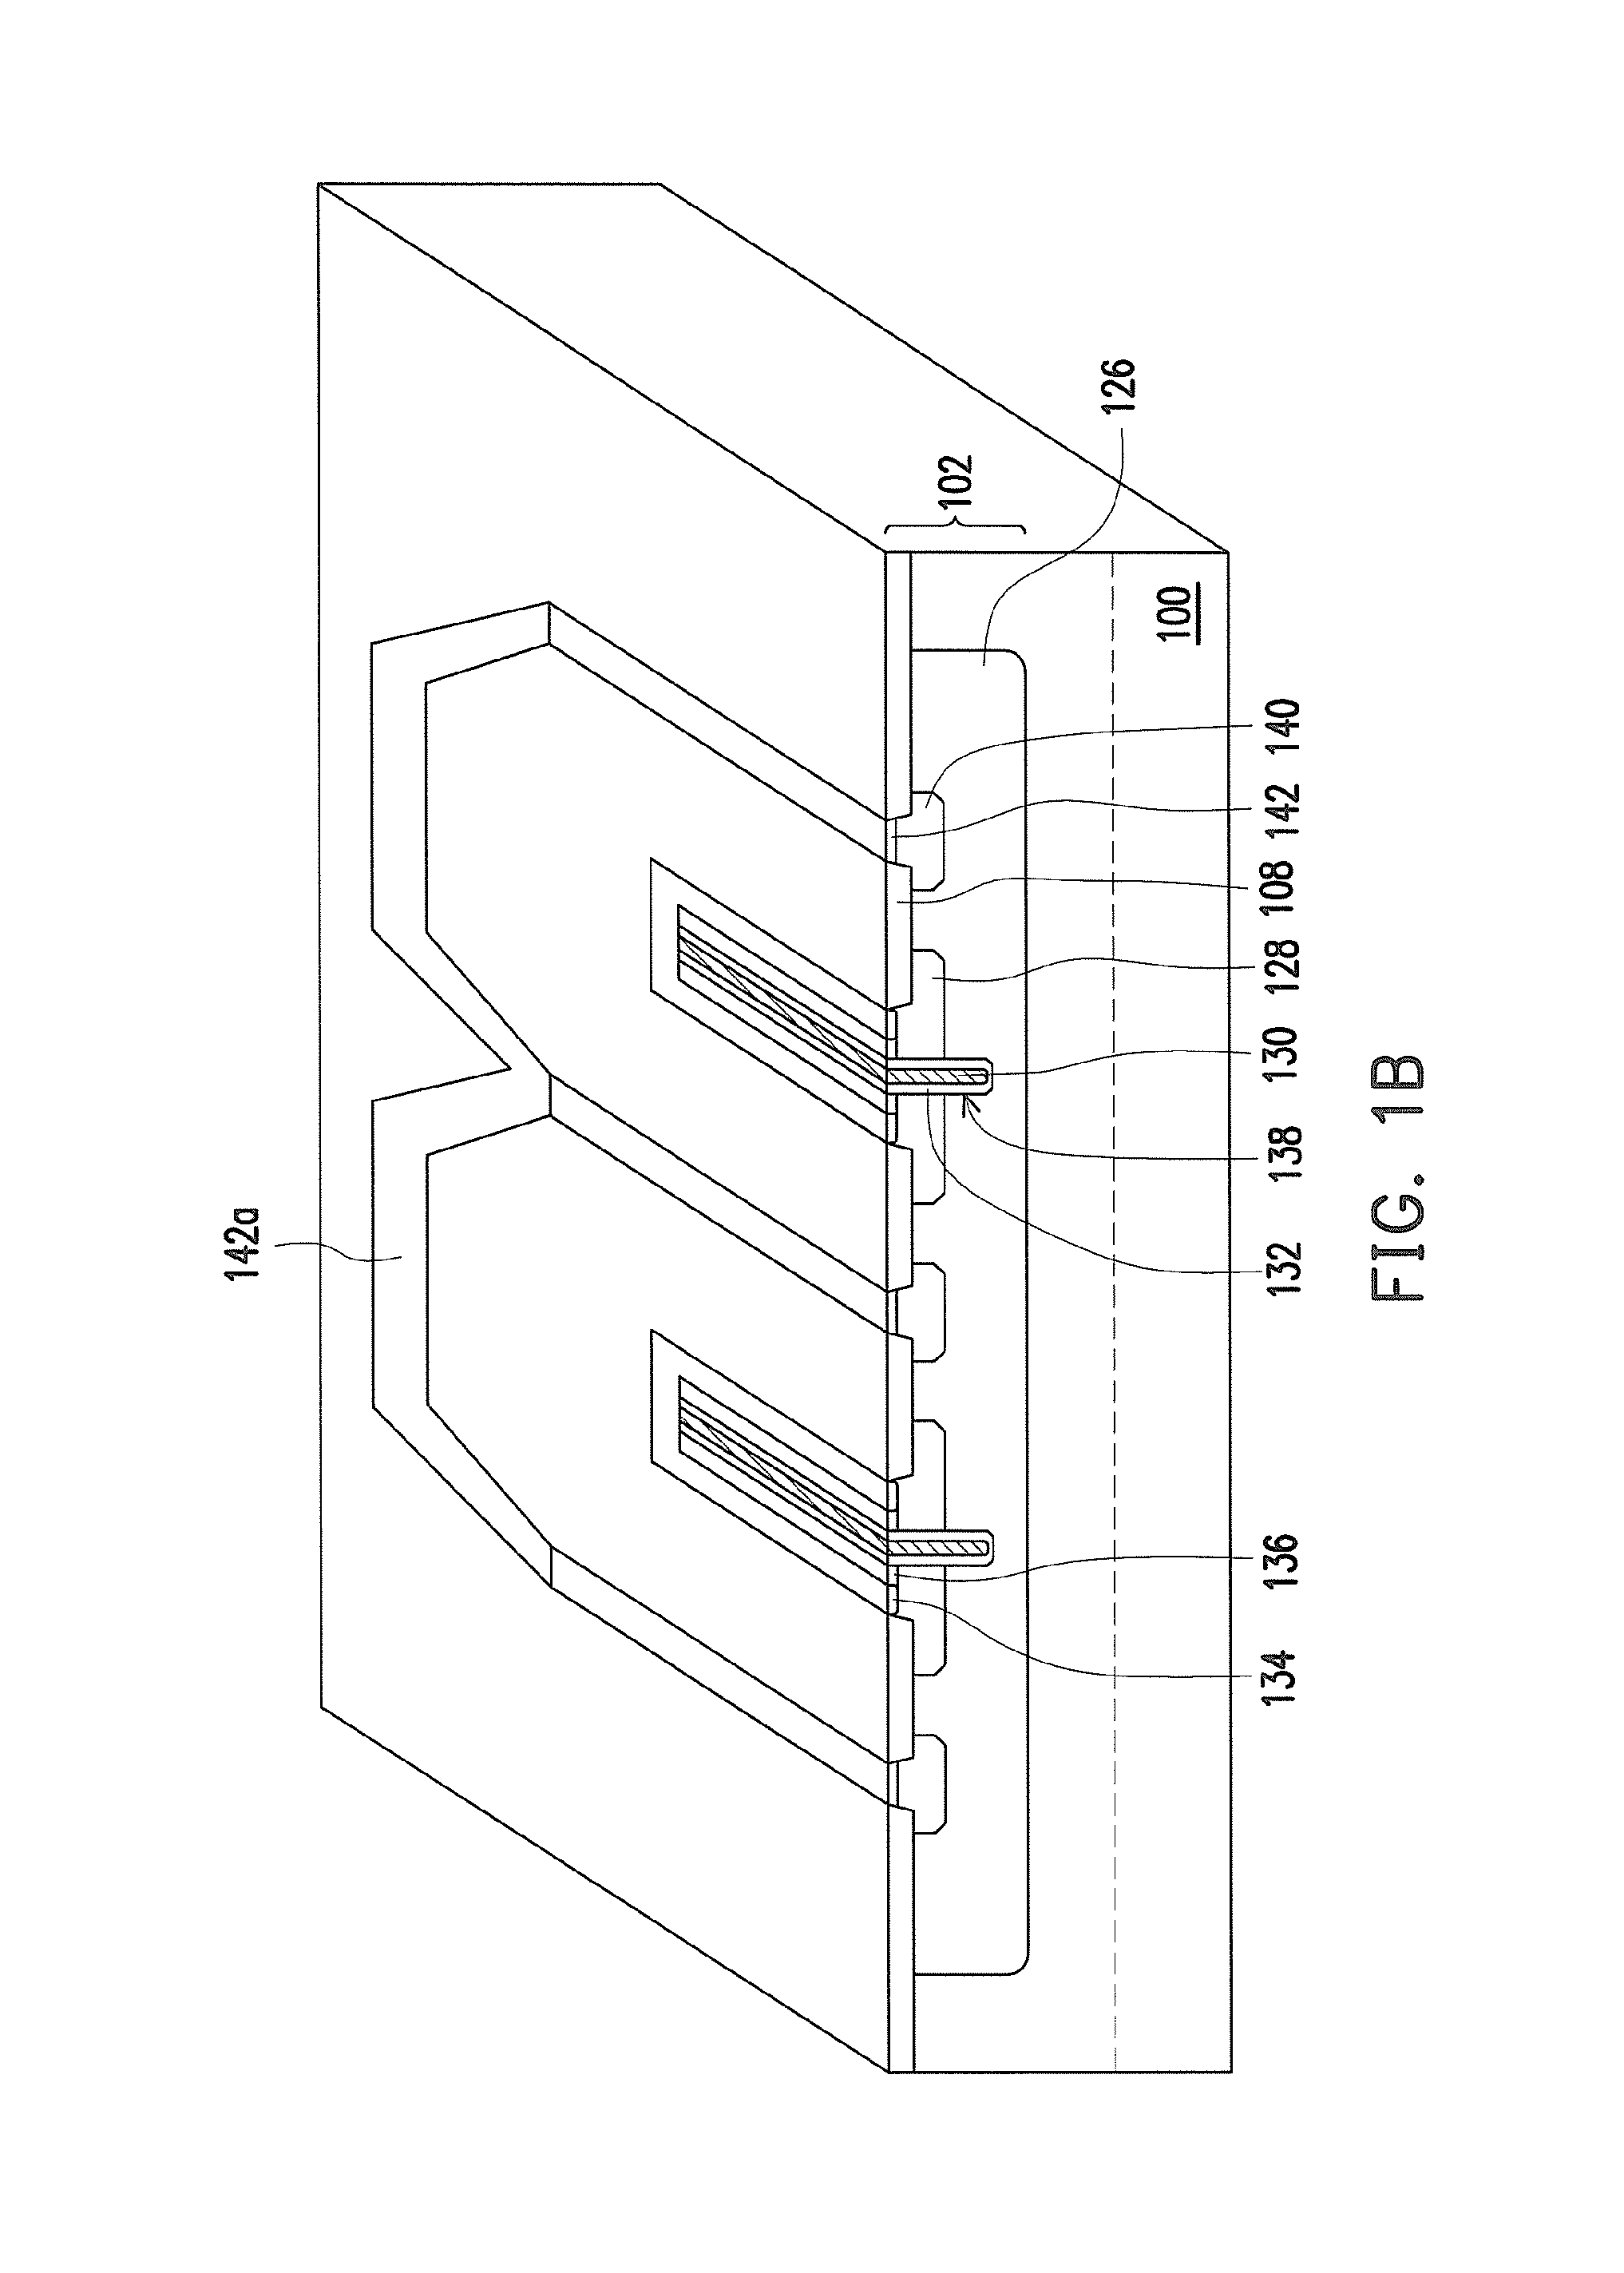 Trench lateral diffusion metal oxide semiconductor device and manufacturing method of the same